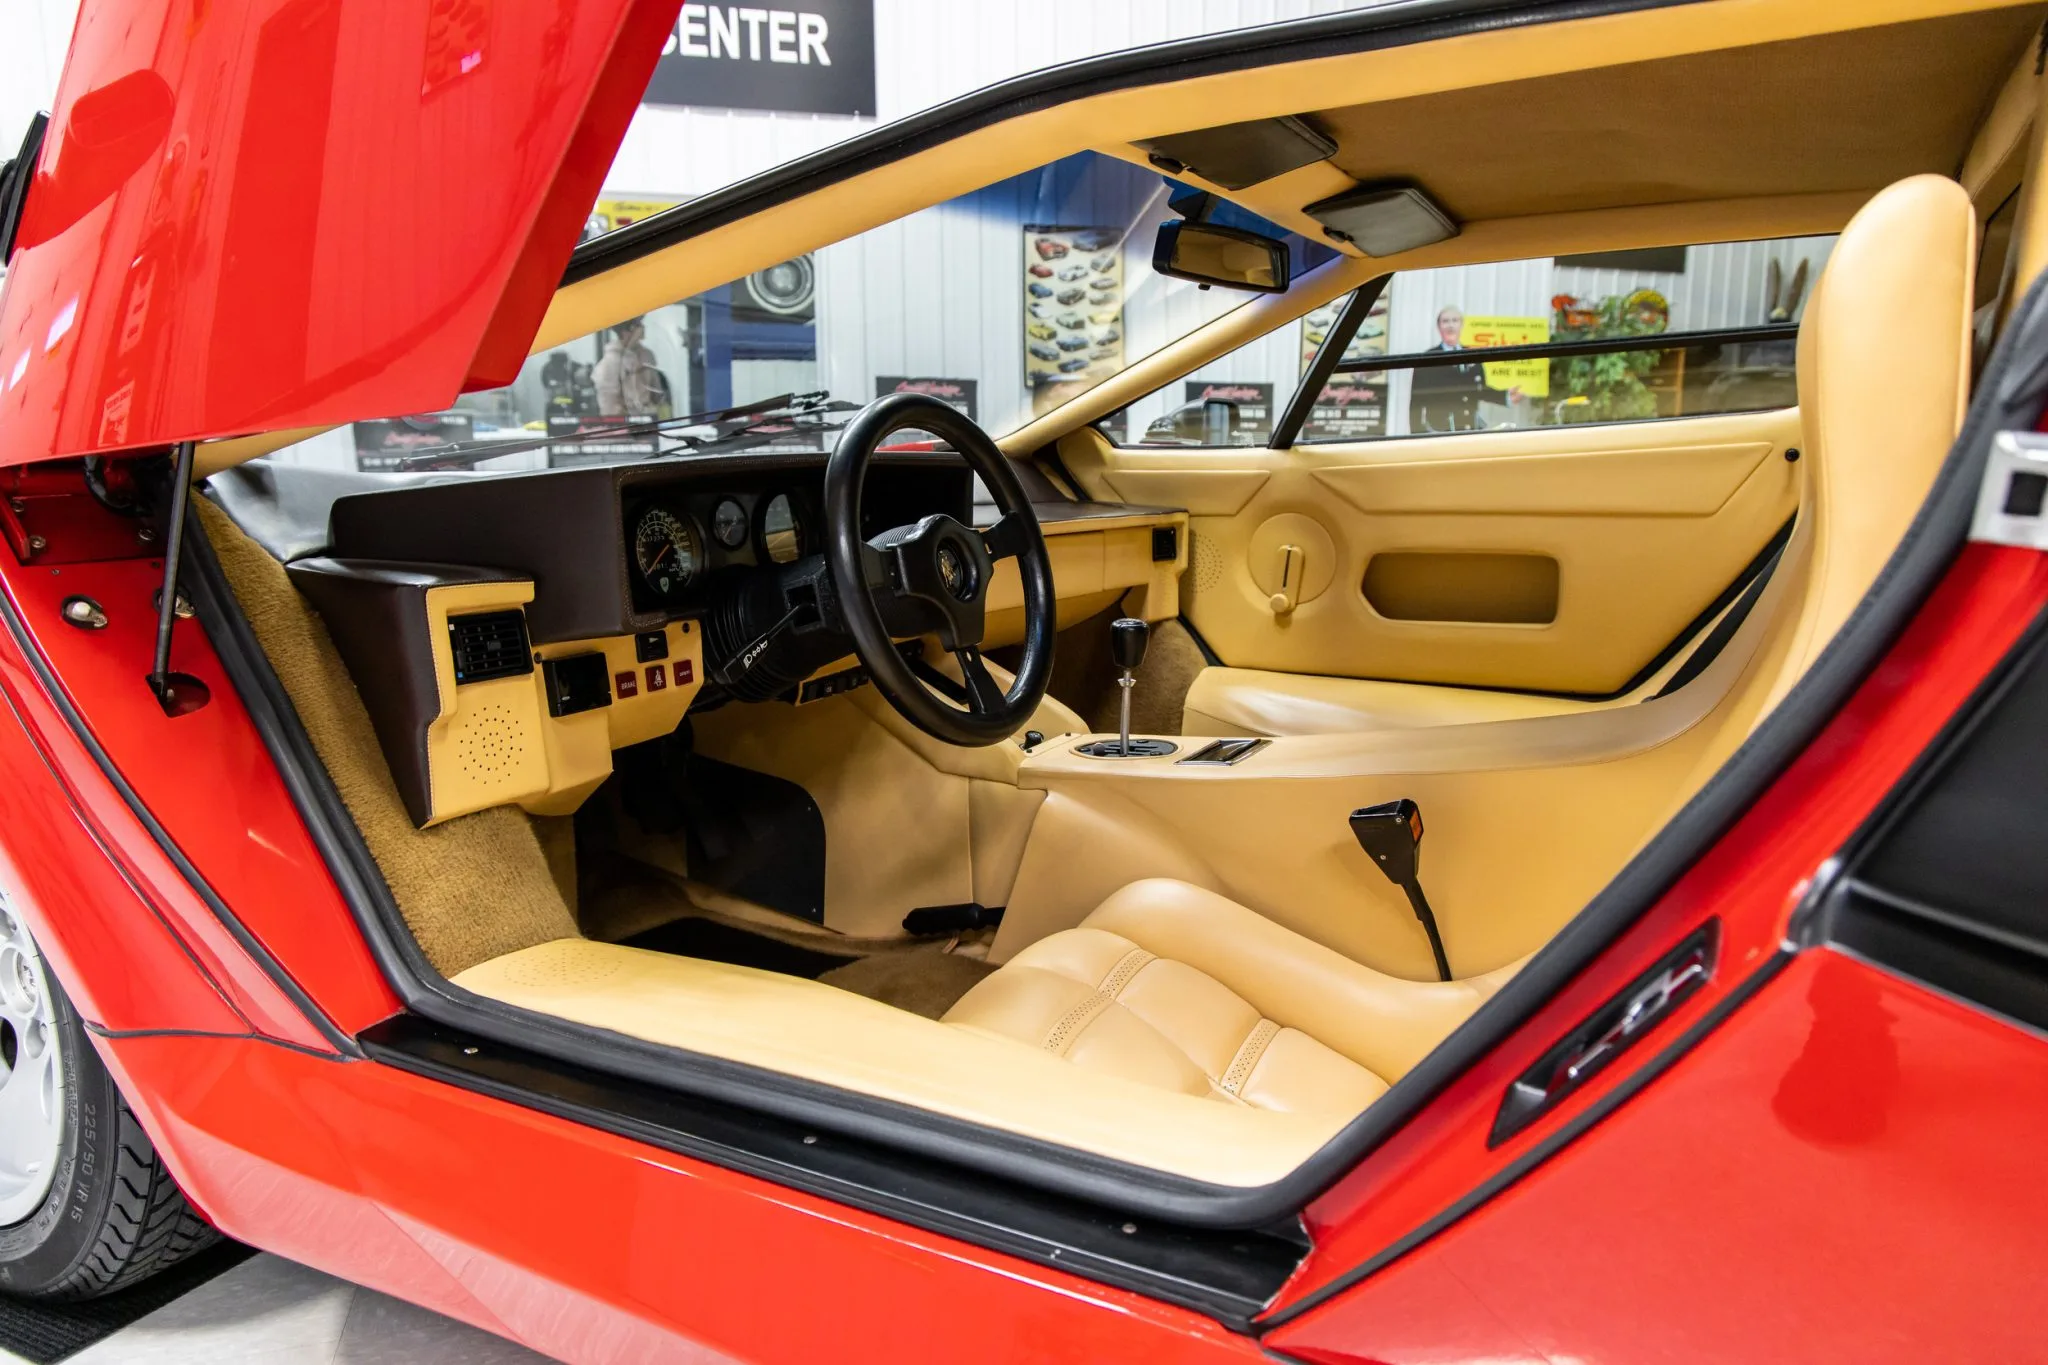 Rare Lamborghini Countach Hits The Auction Block With Just 7,000km On The Dash